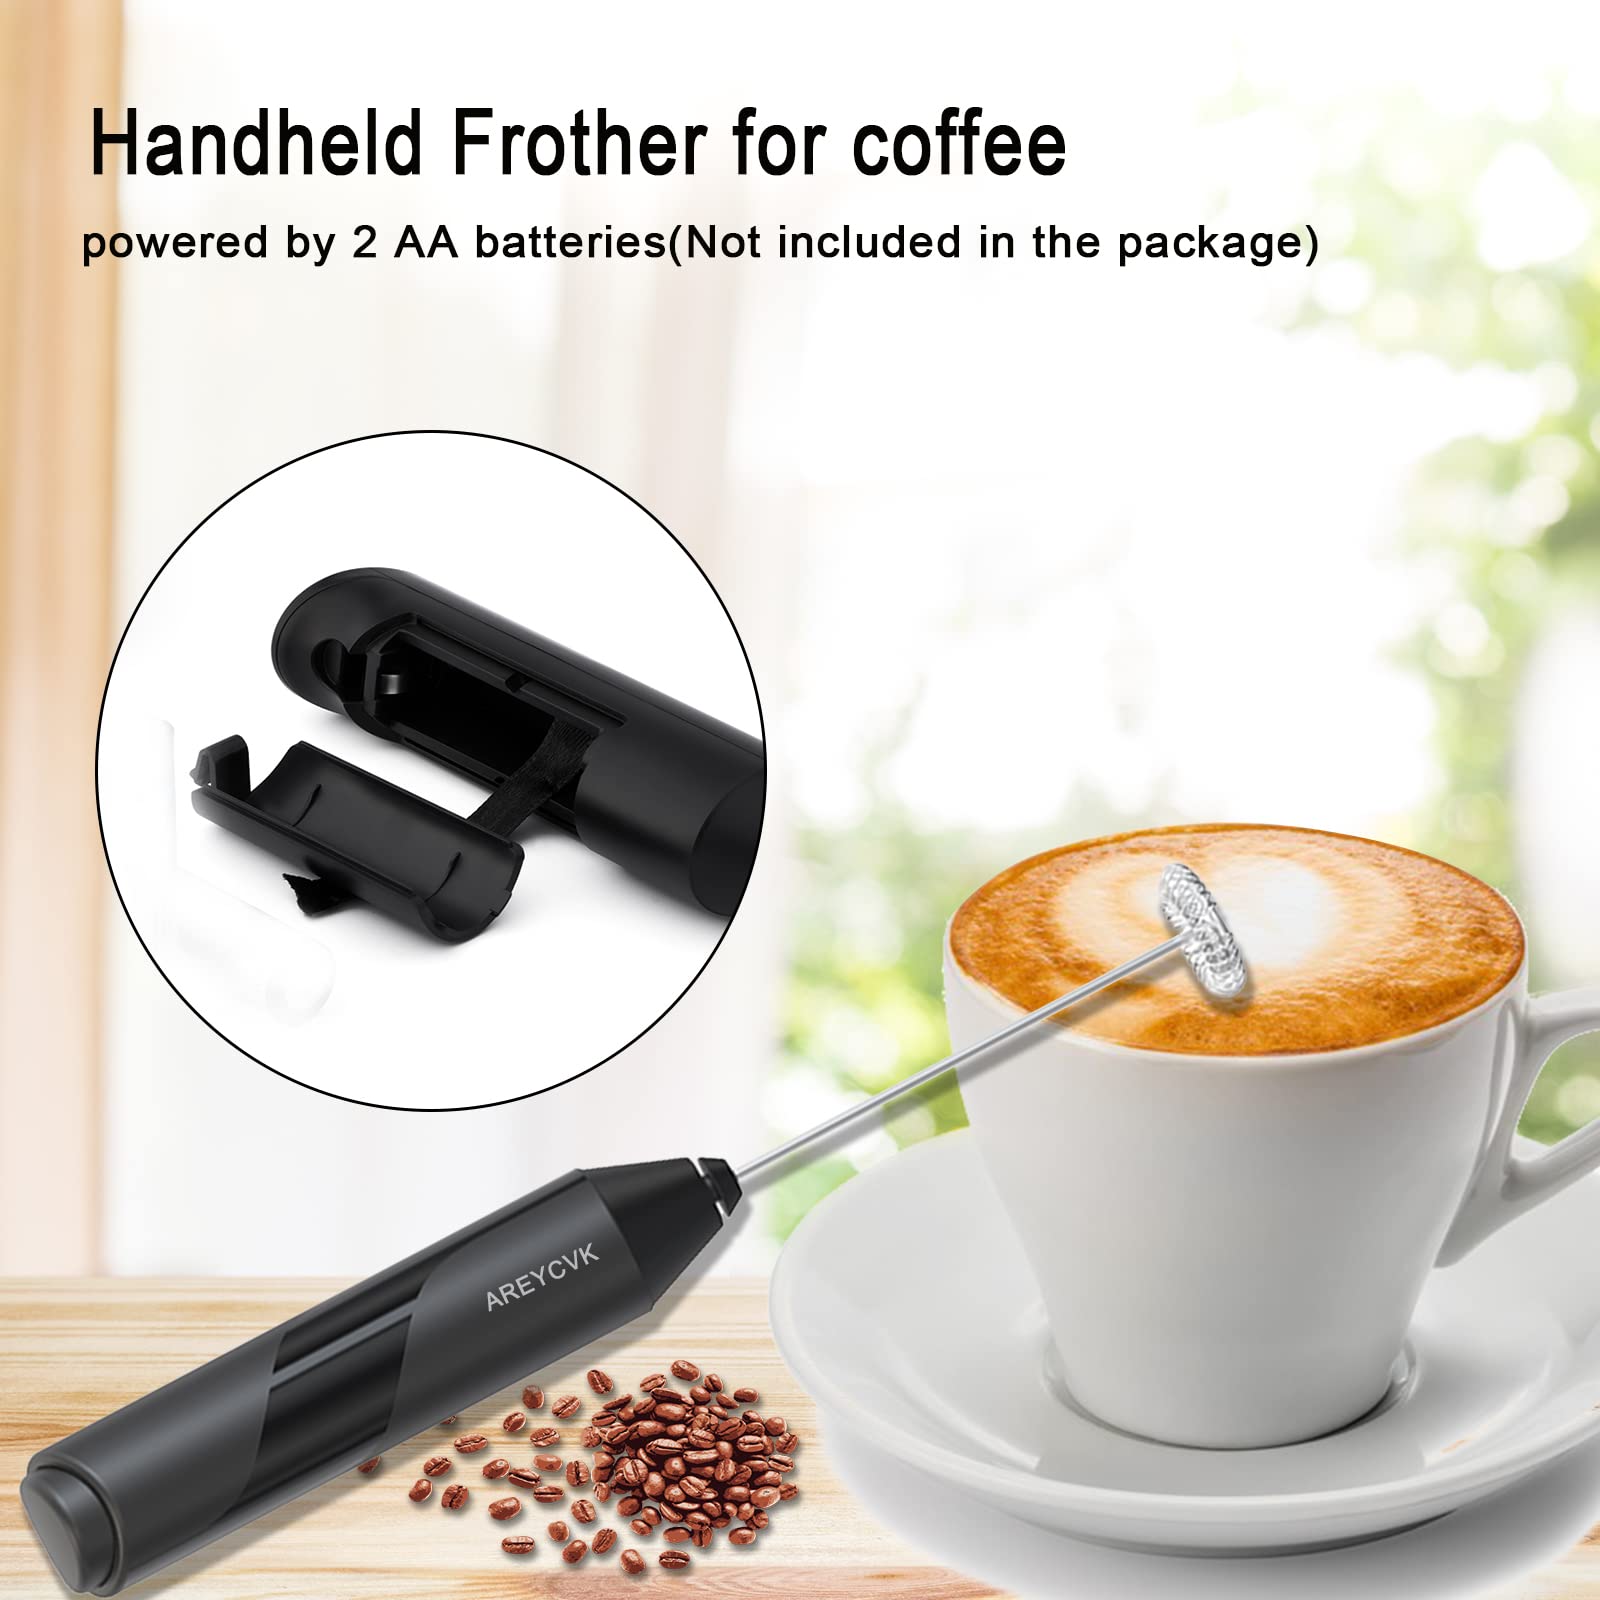 AREYCVK Handheld milk frother Small mixer for drinks Whisk Frother of Battery Operated,Stainless Steel Frother forlatte,cappuccino,hot ,chocolate, Matcha(BLCAK)